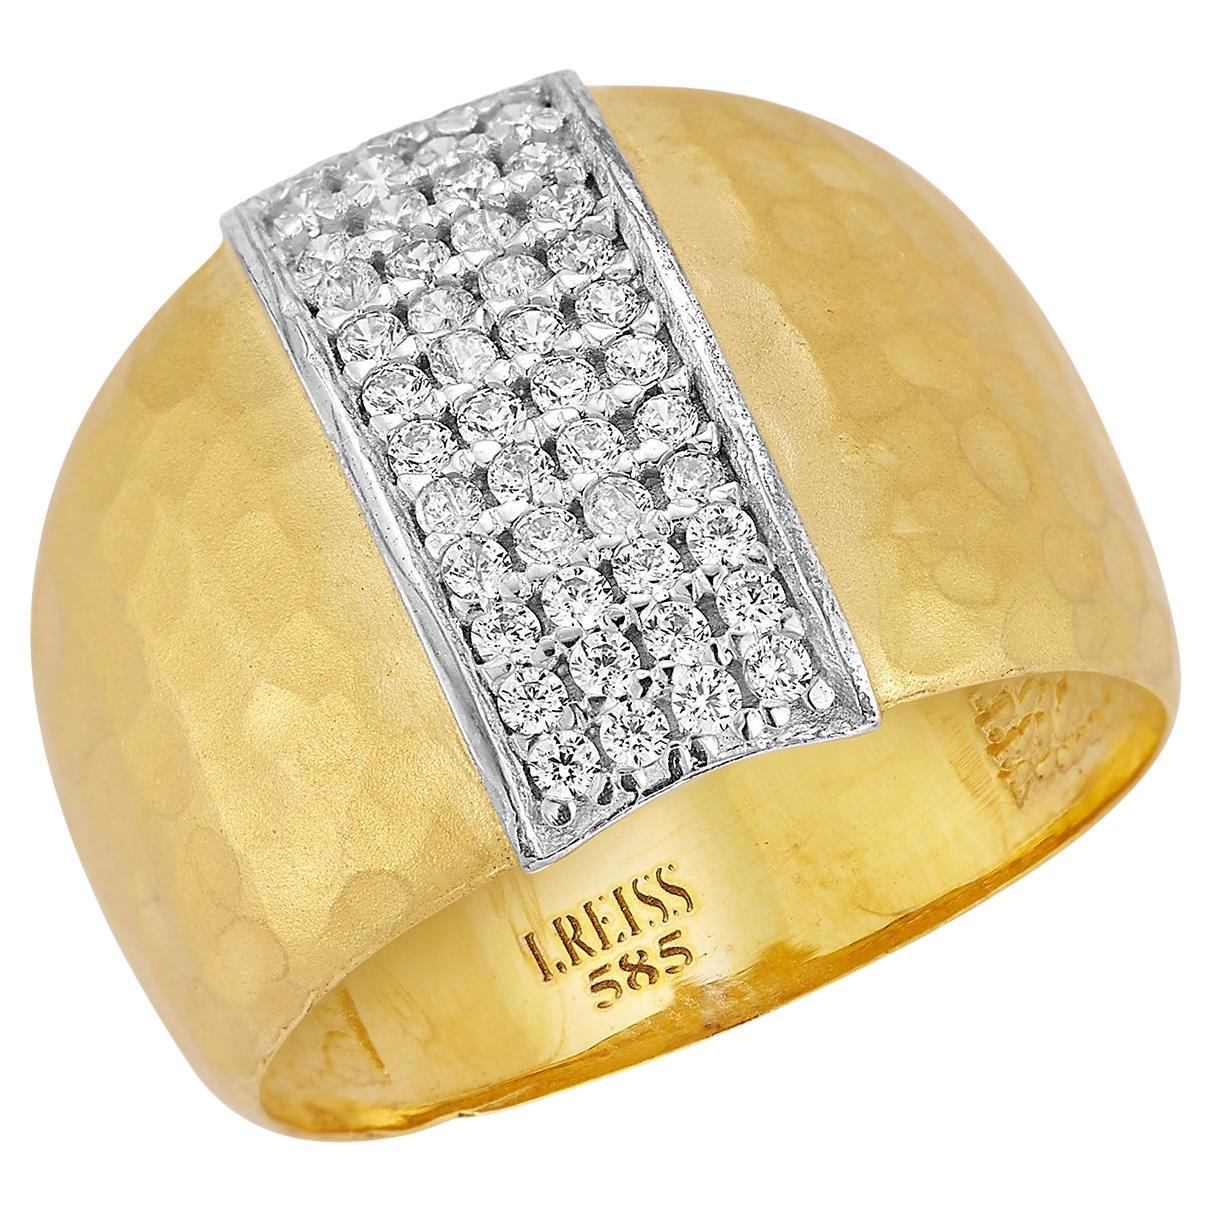 I. Reiss Dome Rings